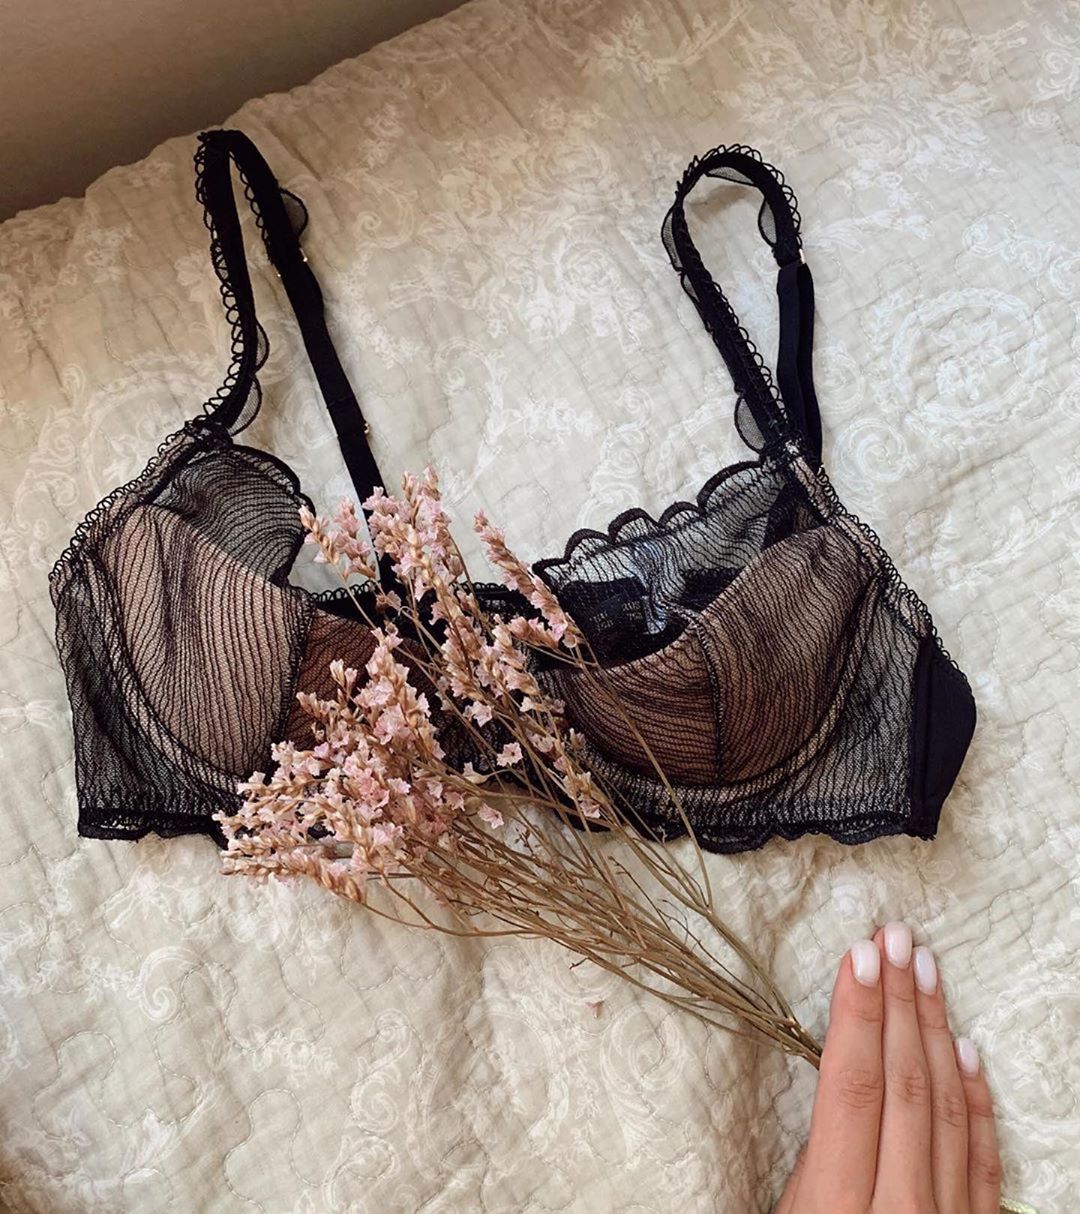 INCANTO OFFICIAL - Floral dreaming. A closer look at the fine detailing of Dion Collection
Thanks to lovely Appolinaria @apskrundz 💕
Discover more lingerie on SALE 🔥 in our digital store
Bra [CD11364]...